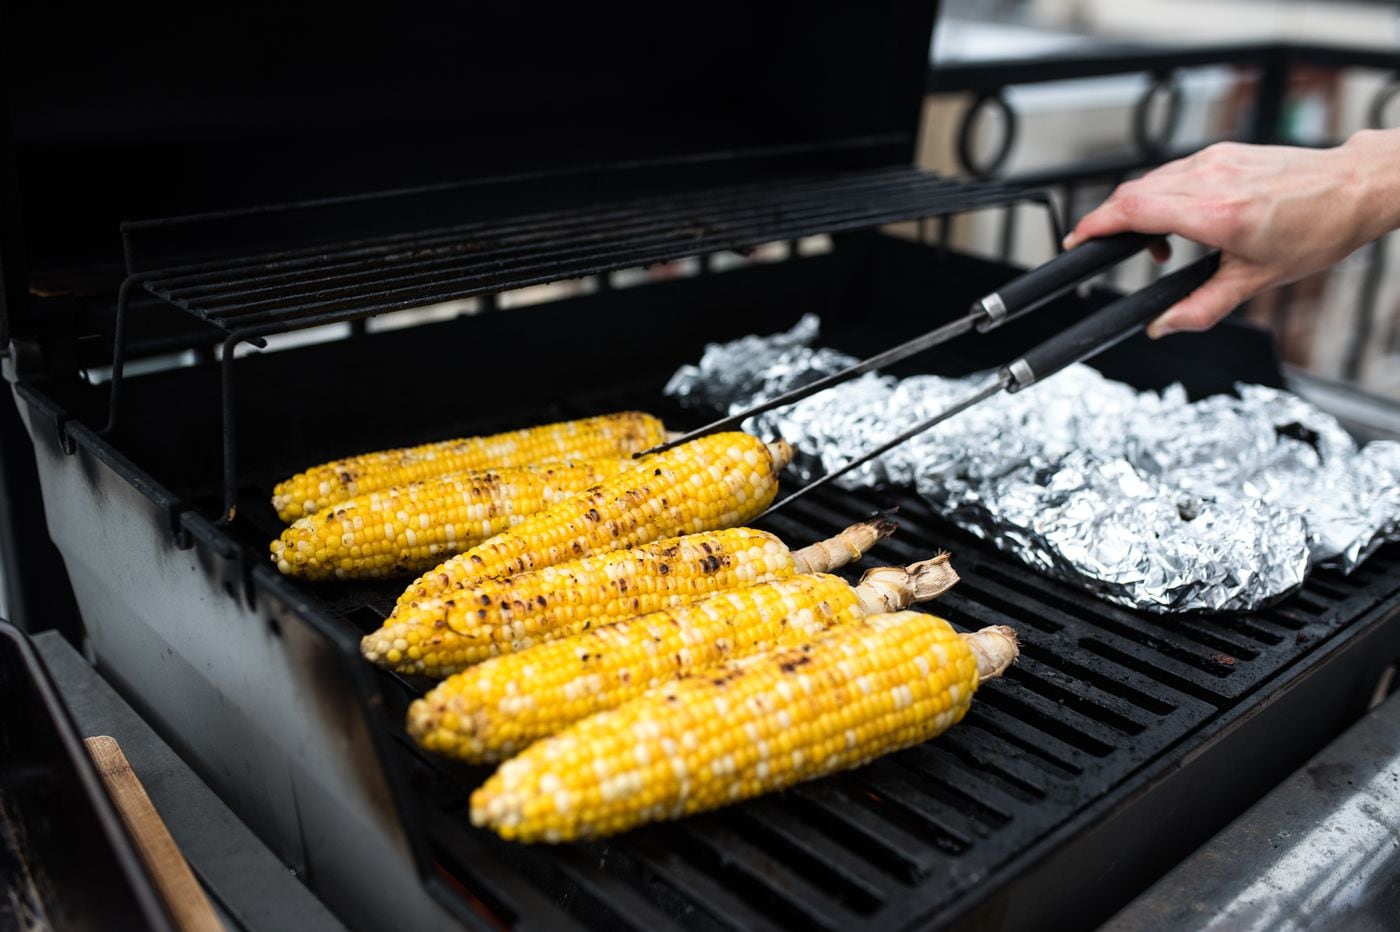 How to prep for a cookout, when the barbecue is far from your backyard